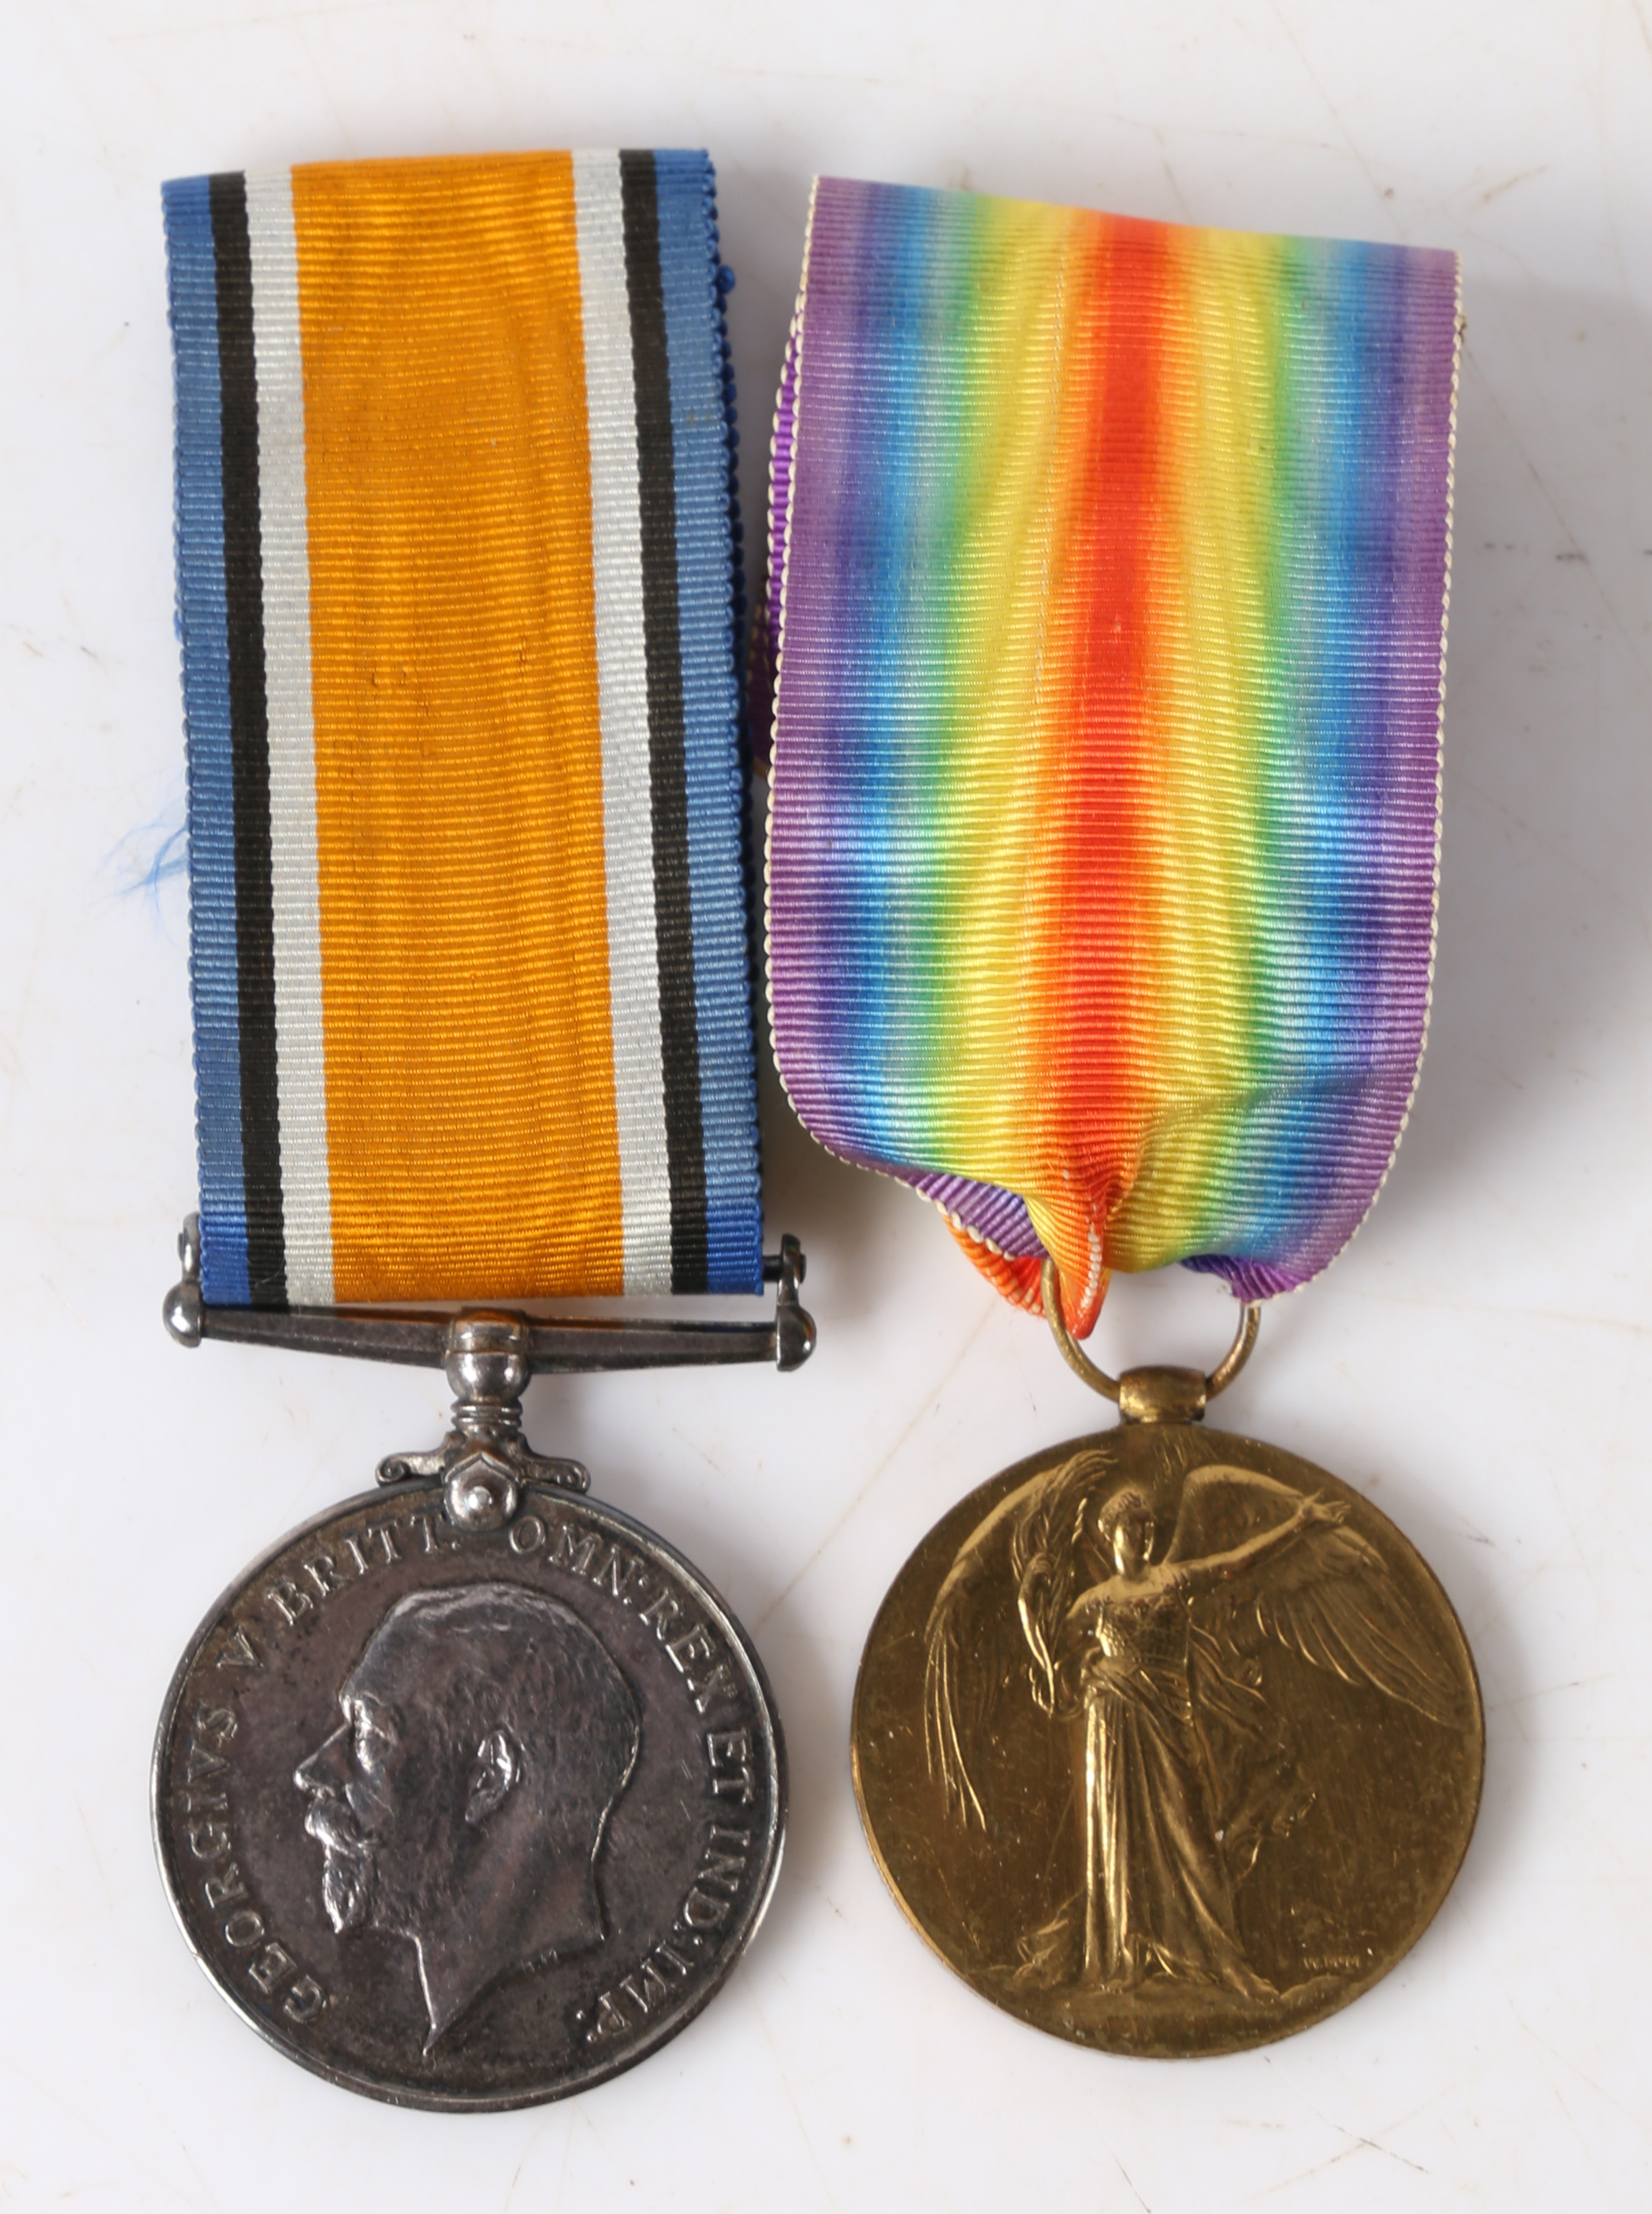 First World War Battle of the Somme casualty pair of medals, 1914-1918 British War Medal and Victory